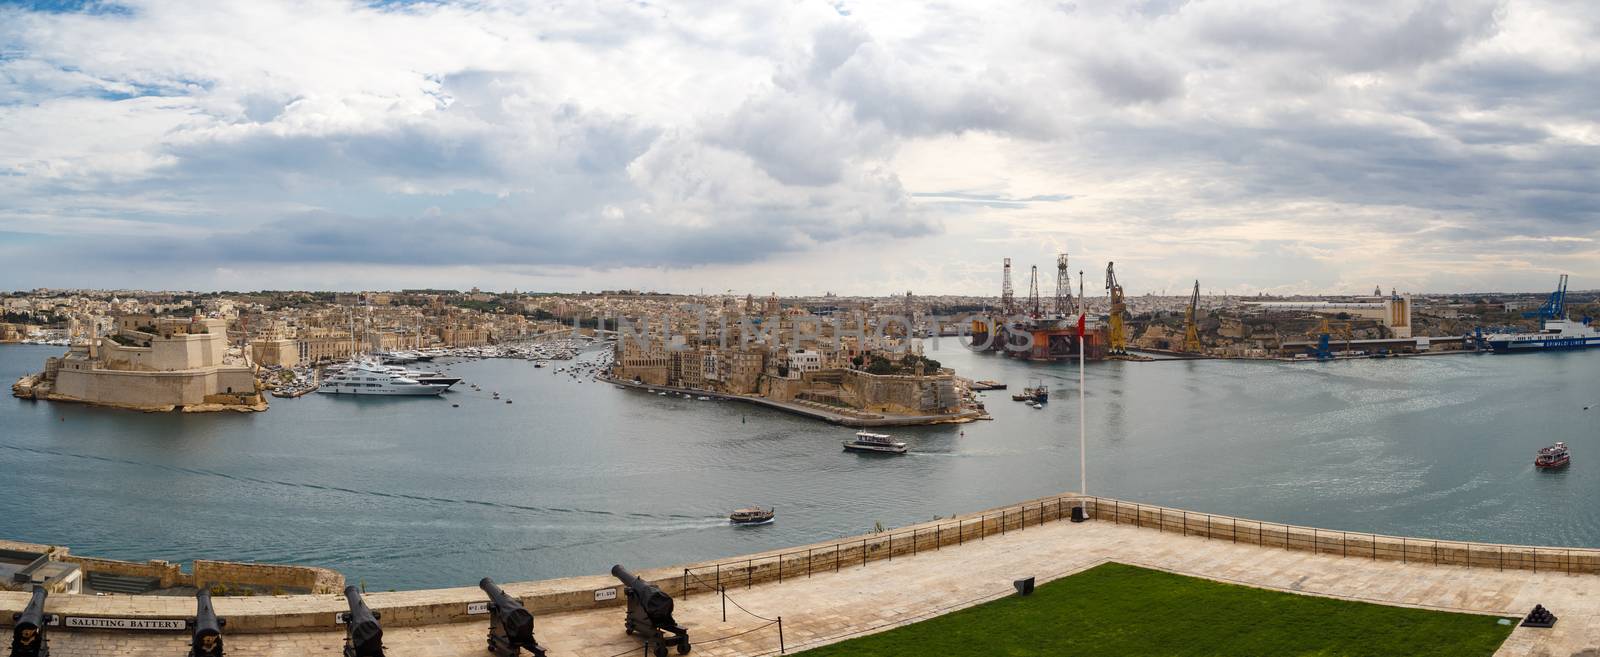 VALLETTA, MALTA - OCTOBER 30, 2015 : Panoramic view of the gardens of Lascaris War Rooms in Valletta, Malta, with seascape on cloudy blue sky background.